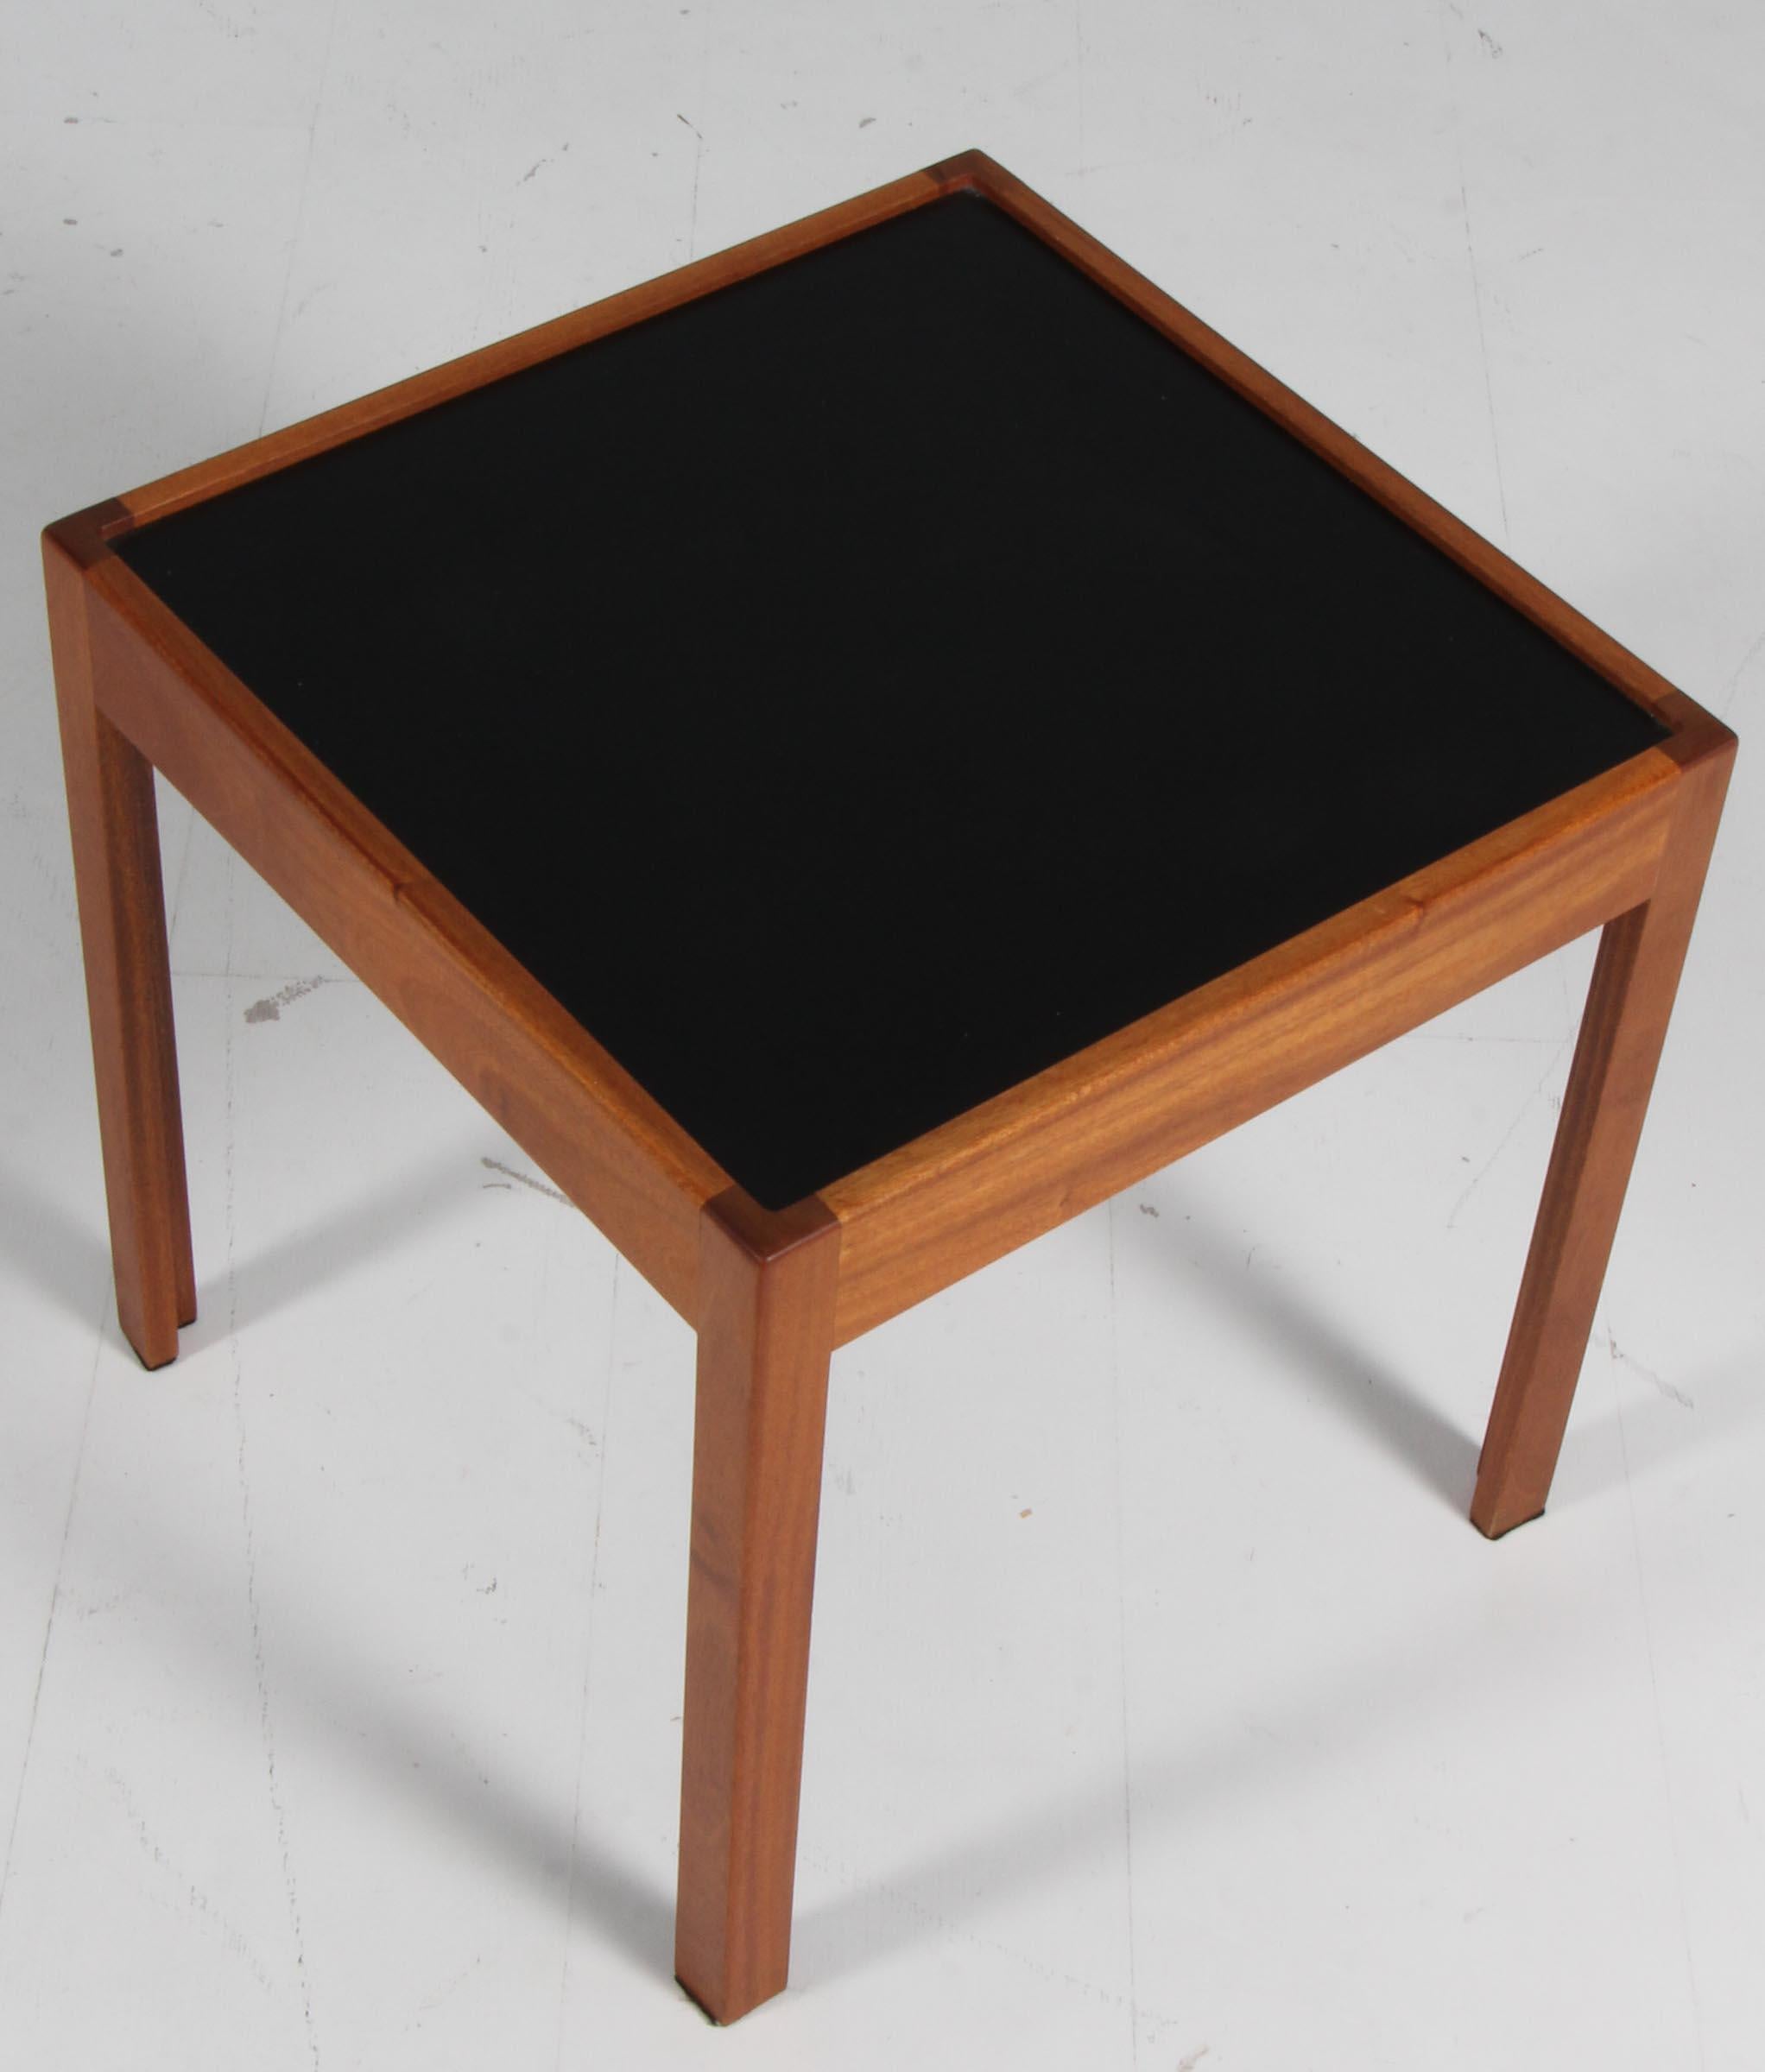 Side table of mahogany with top of black formica.
